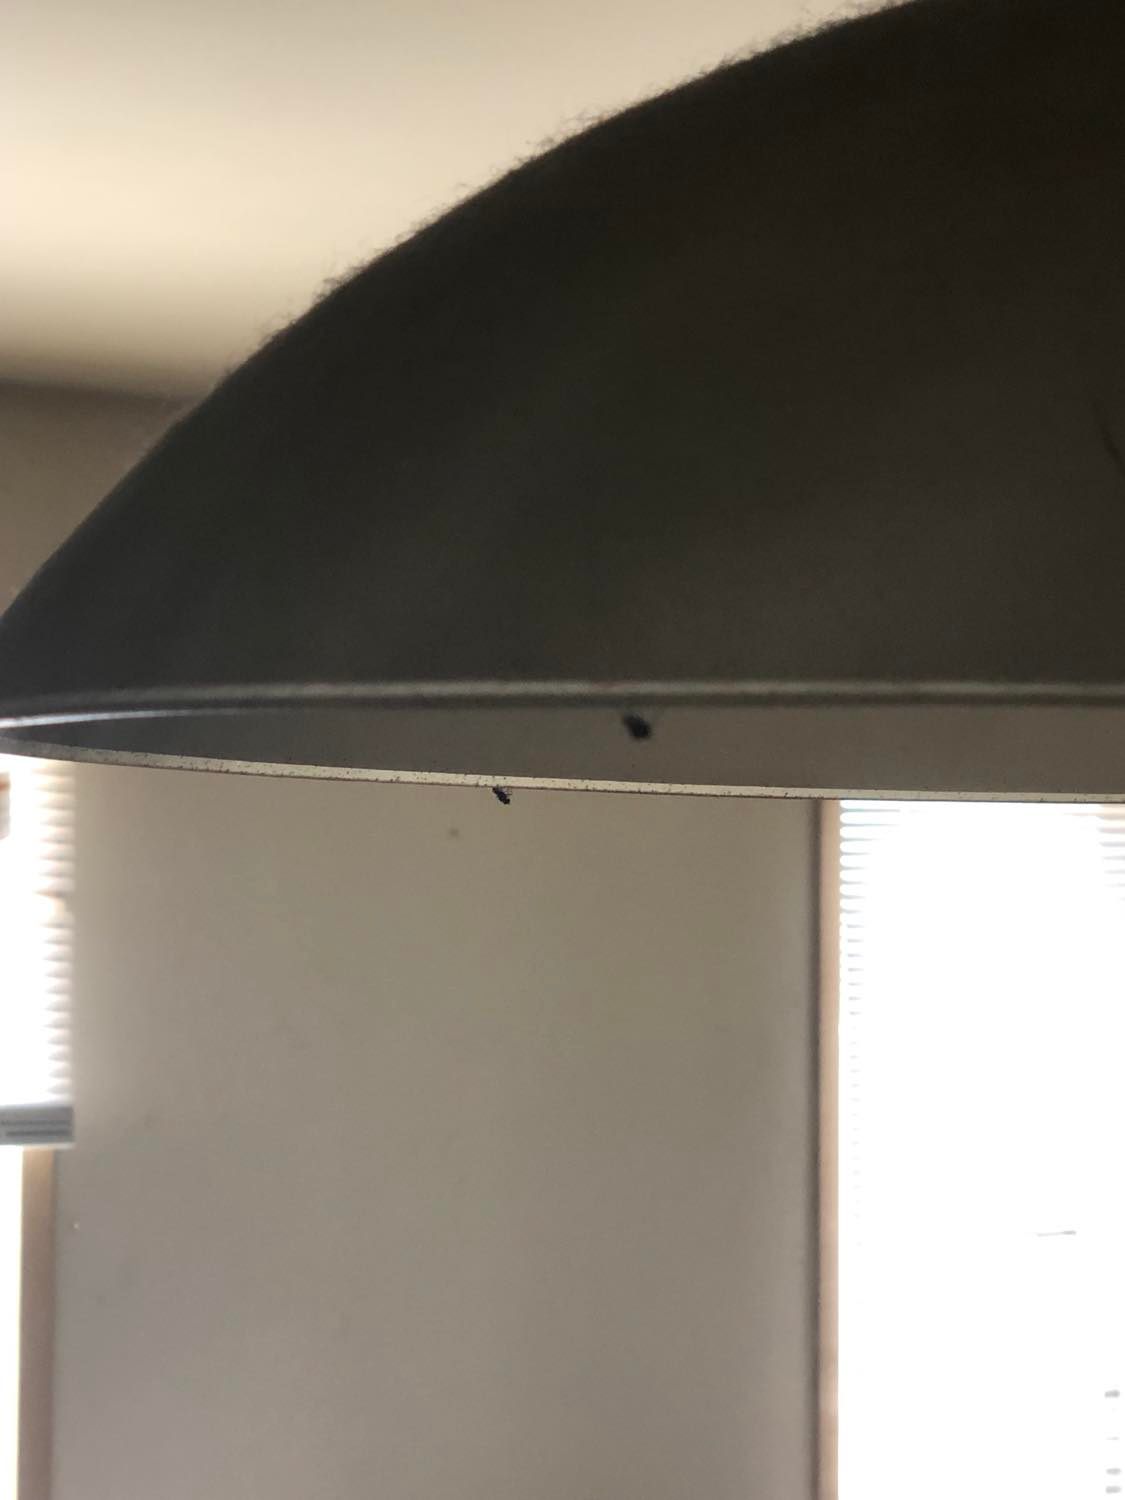 Two flies on the lampshade, on somewhat opposite sides from eachother, with a white livingroom wall and a window in the background.